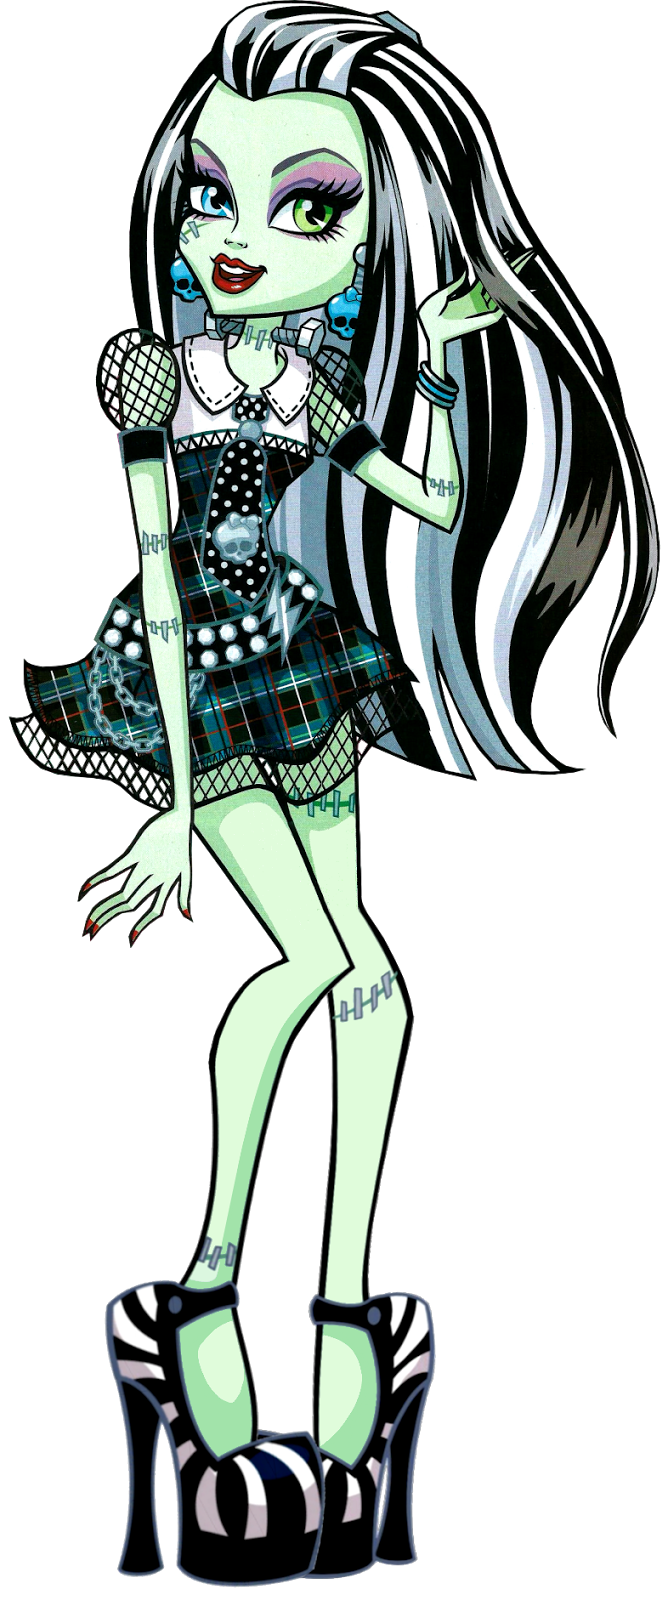 Image - Frankie Stein.22.png | Monster High Wiki | FANDOM powered by Wikia